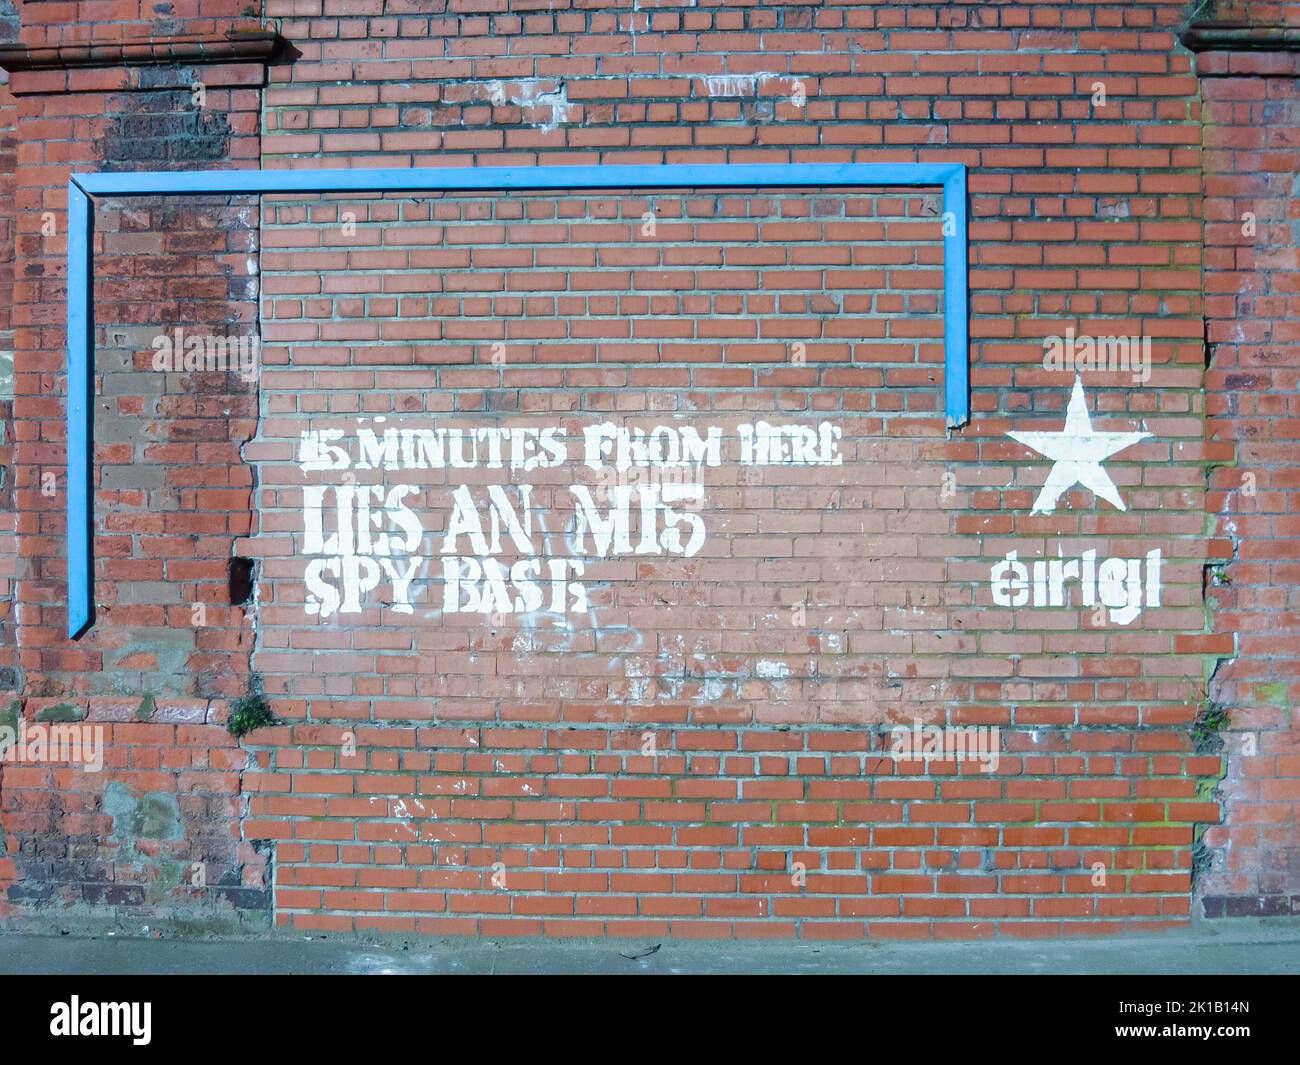 Graffiti in Belfast '15 minutes from here lies an MI5 spy base' left by the Irish Republican group Eirigi. Stock Photo